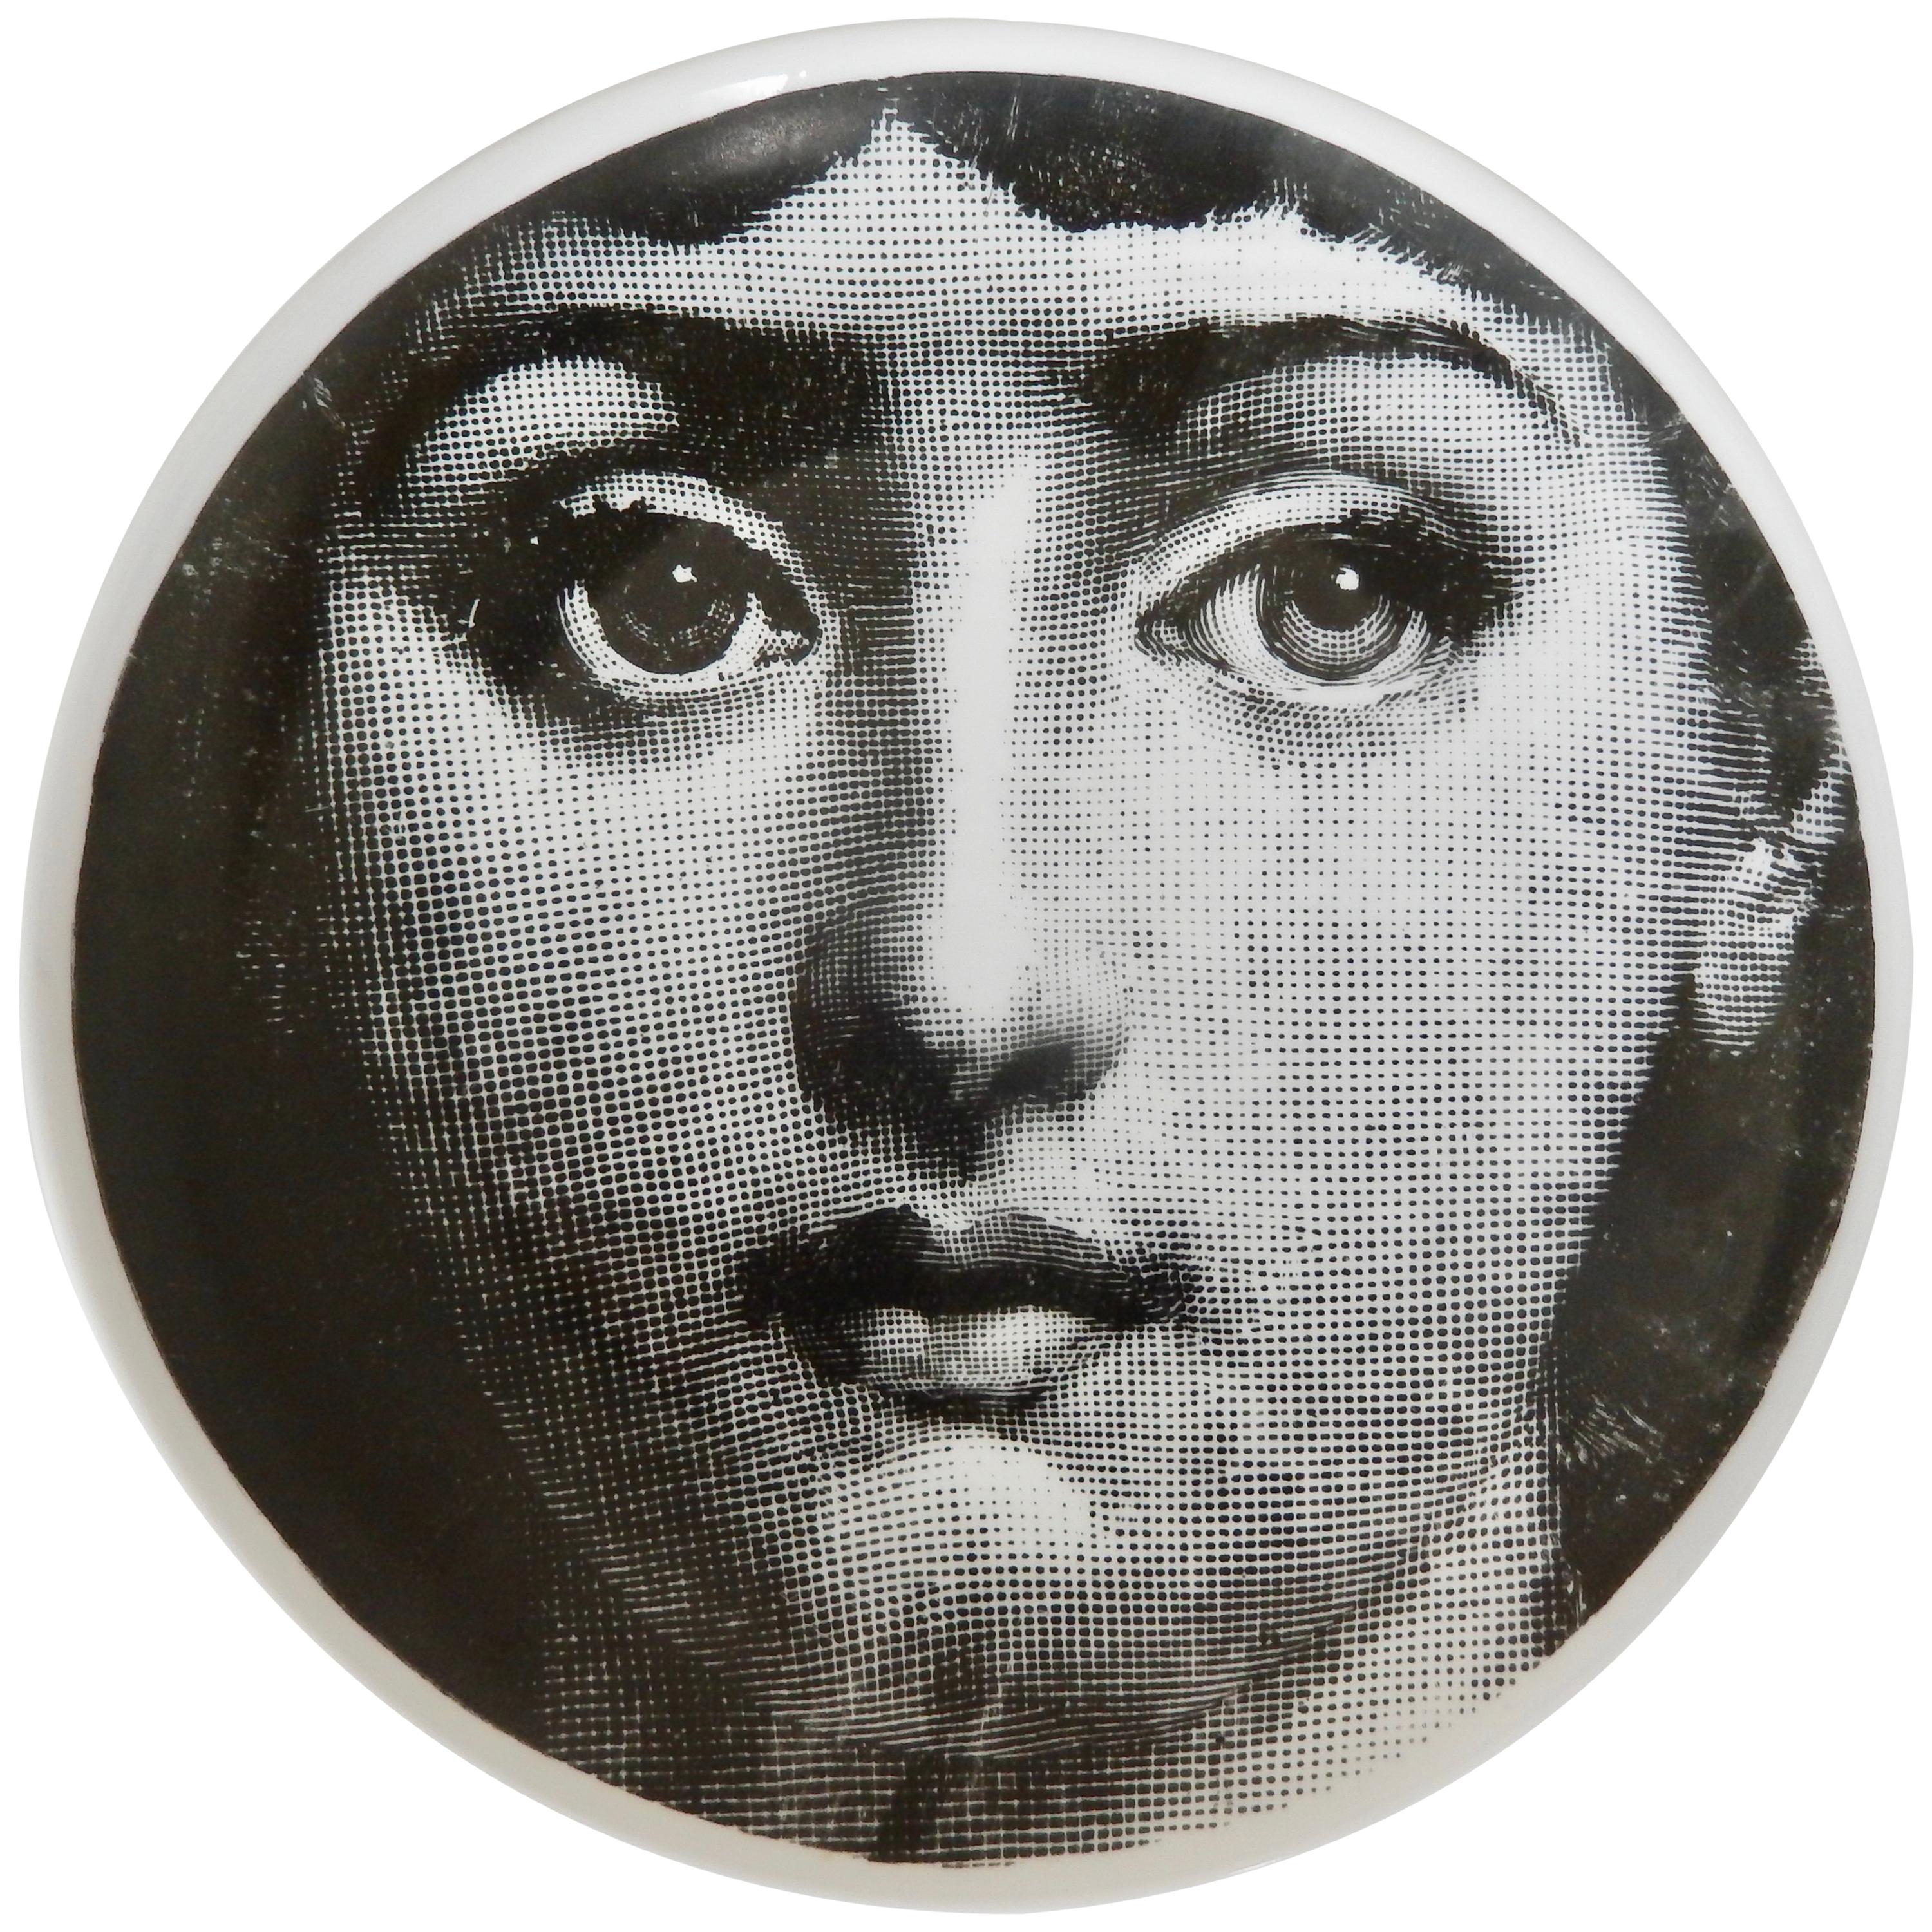 Midcentury Fornasetti Iconic Face Plate, Tema e Variazoni N1 For Sale